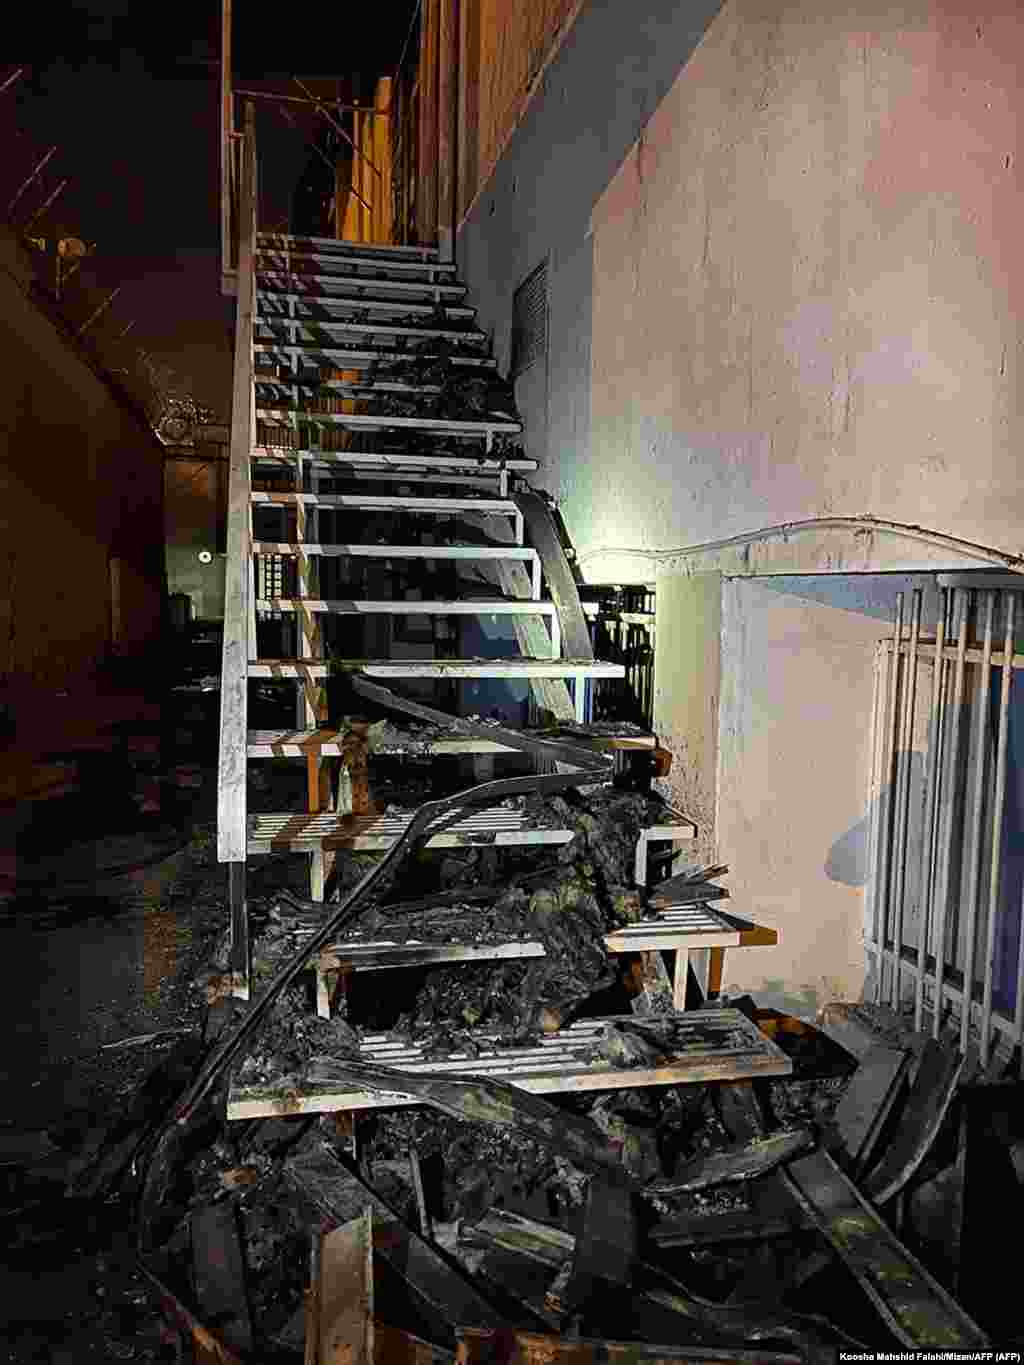 Damage on a stairwell, apparently near the outer wall of Evin prison. The facility is notorious for well-documented abuses, and on-site executions.&nbsp;